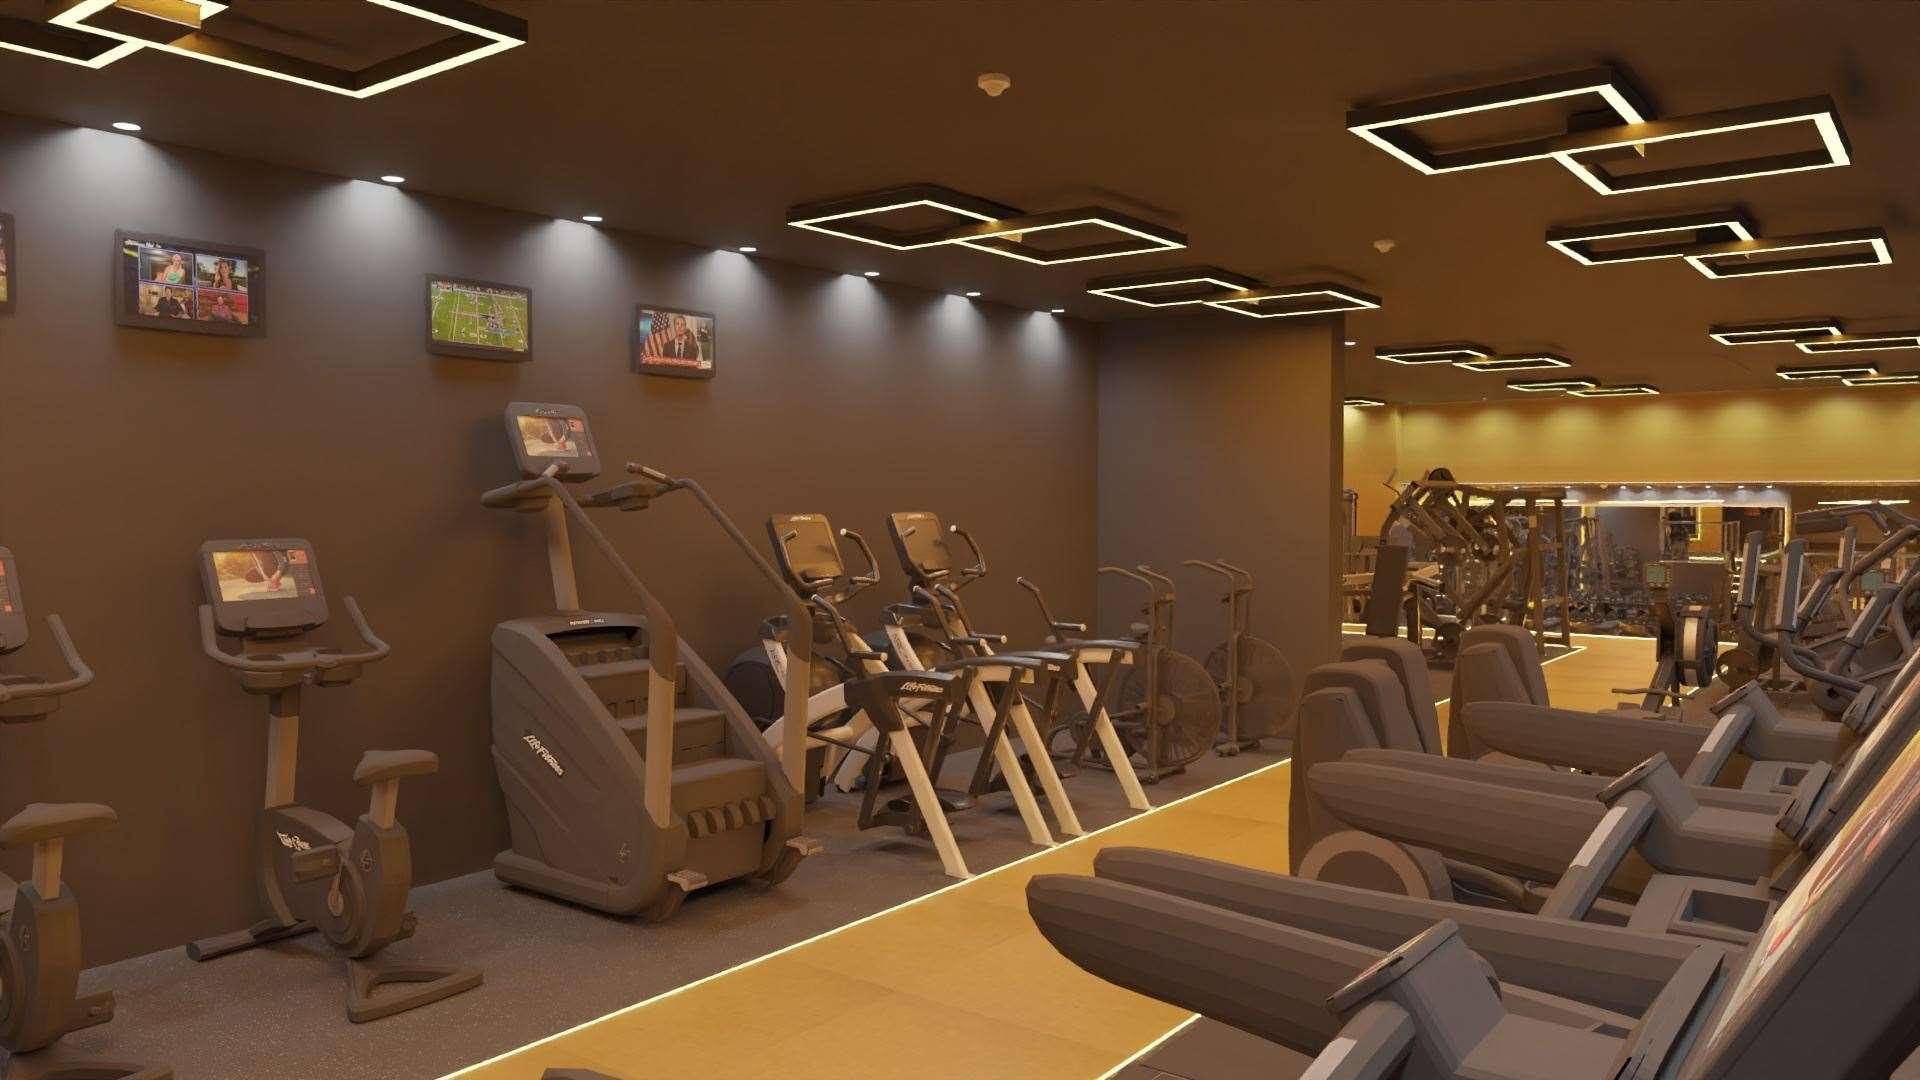 How the Goldex Gym in Gillingham will look